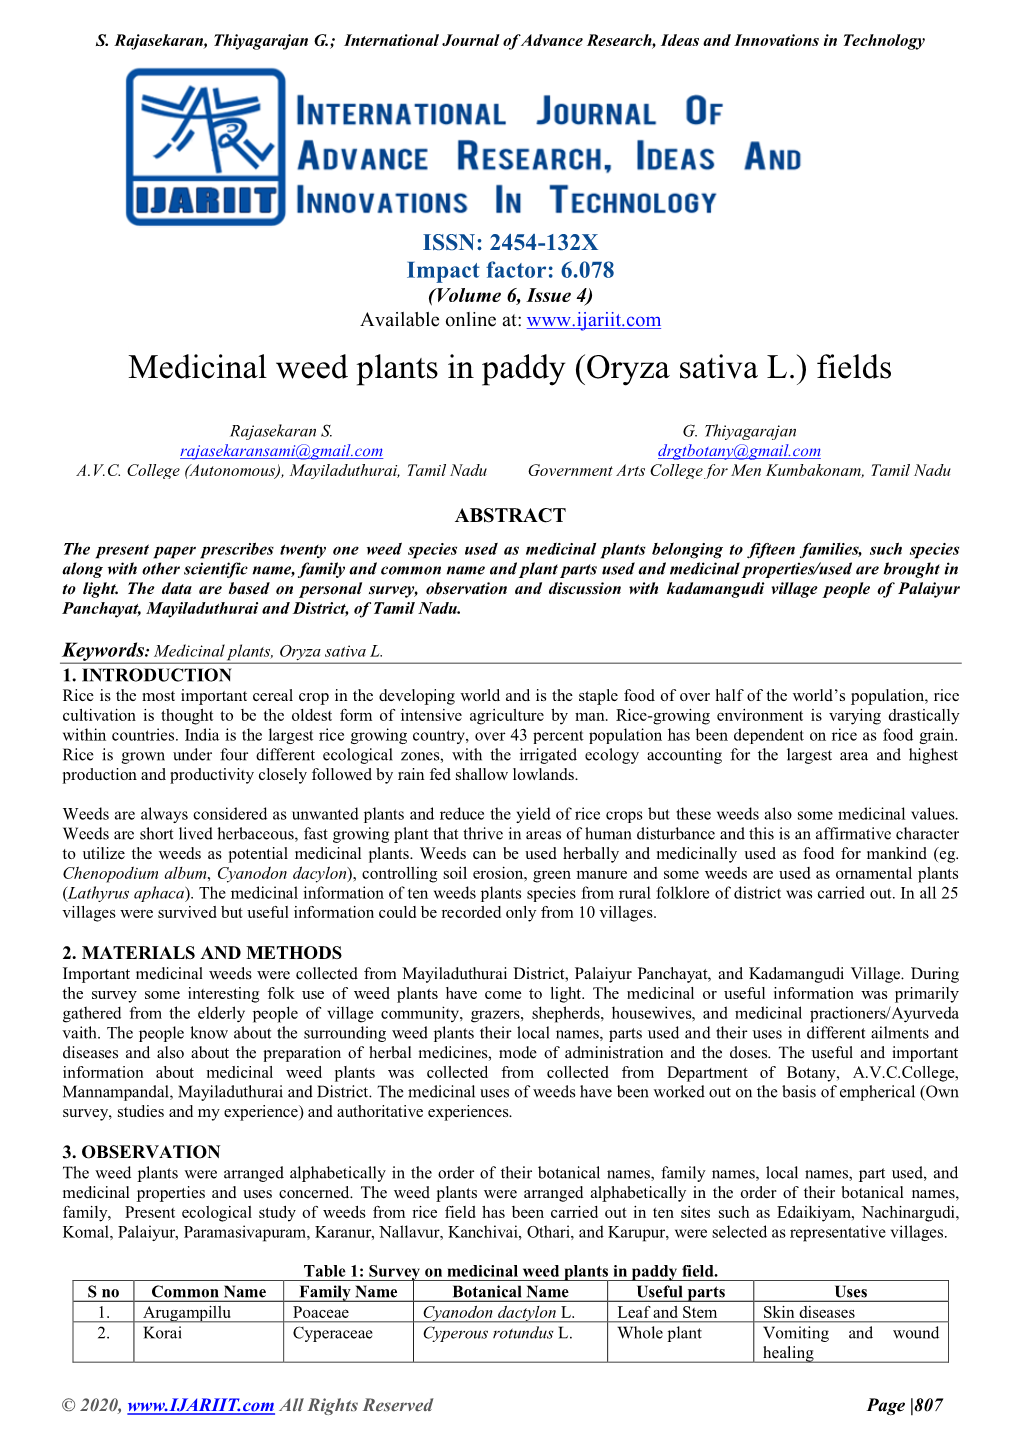 Medicinal Weed Plants in Paddy (Oryza Sativa L.) Fields